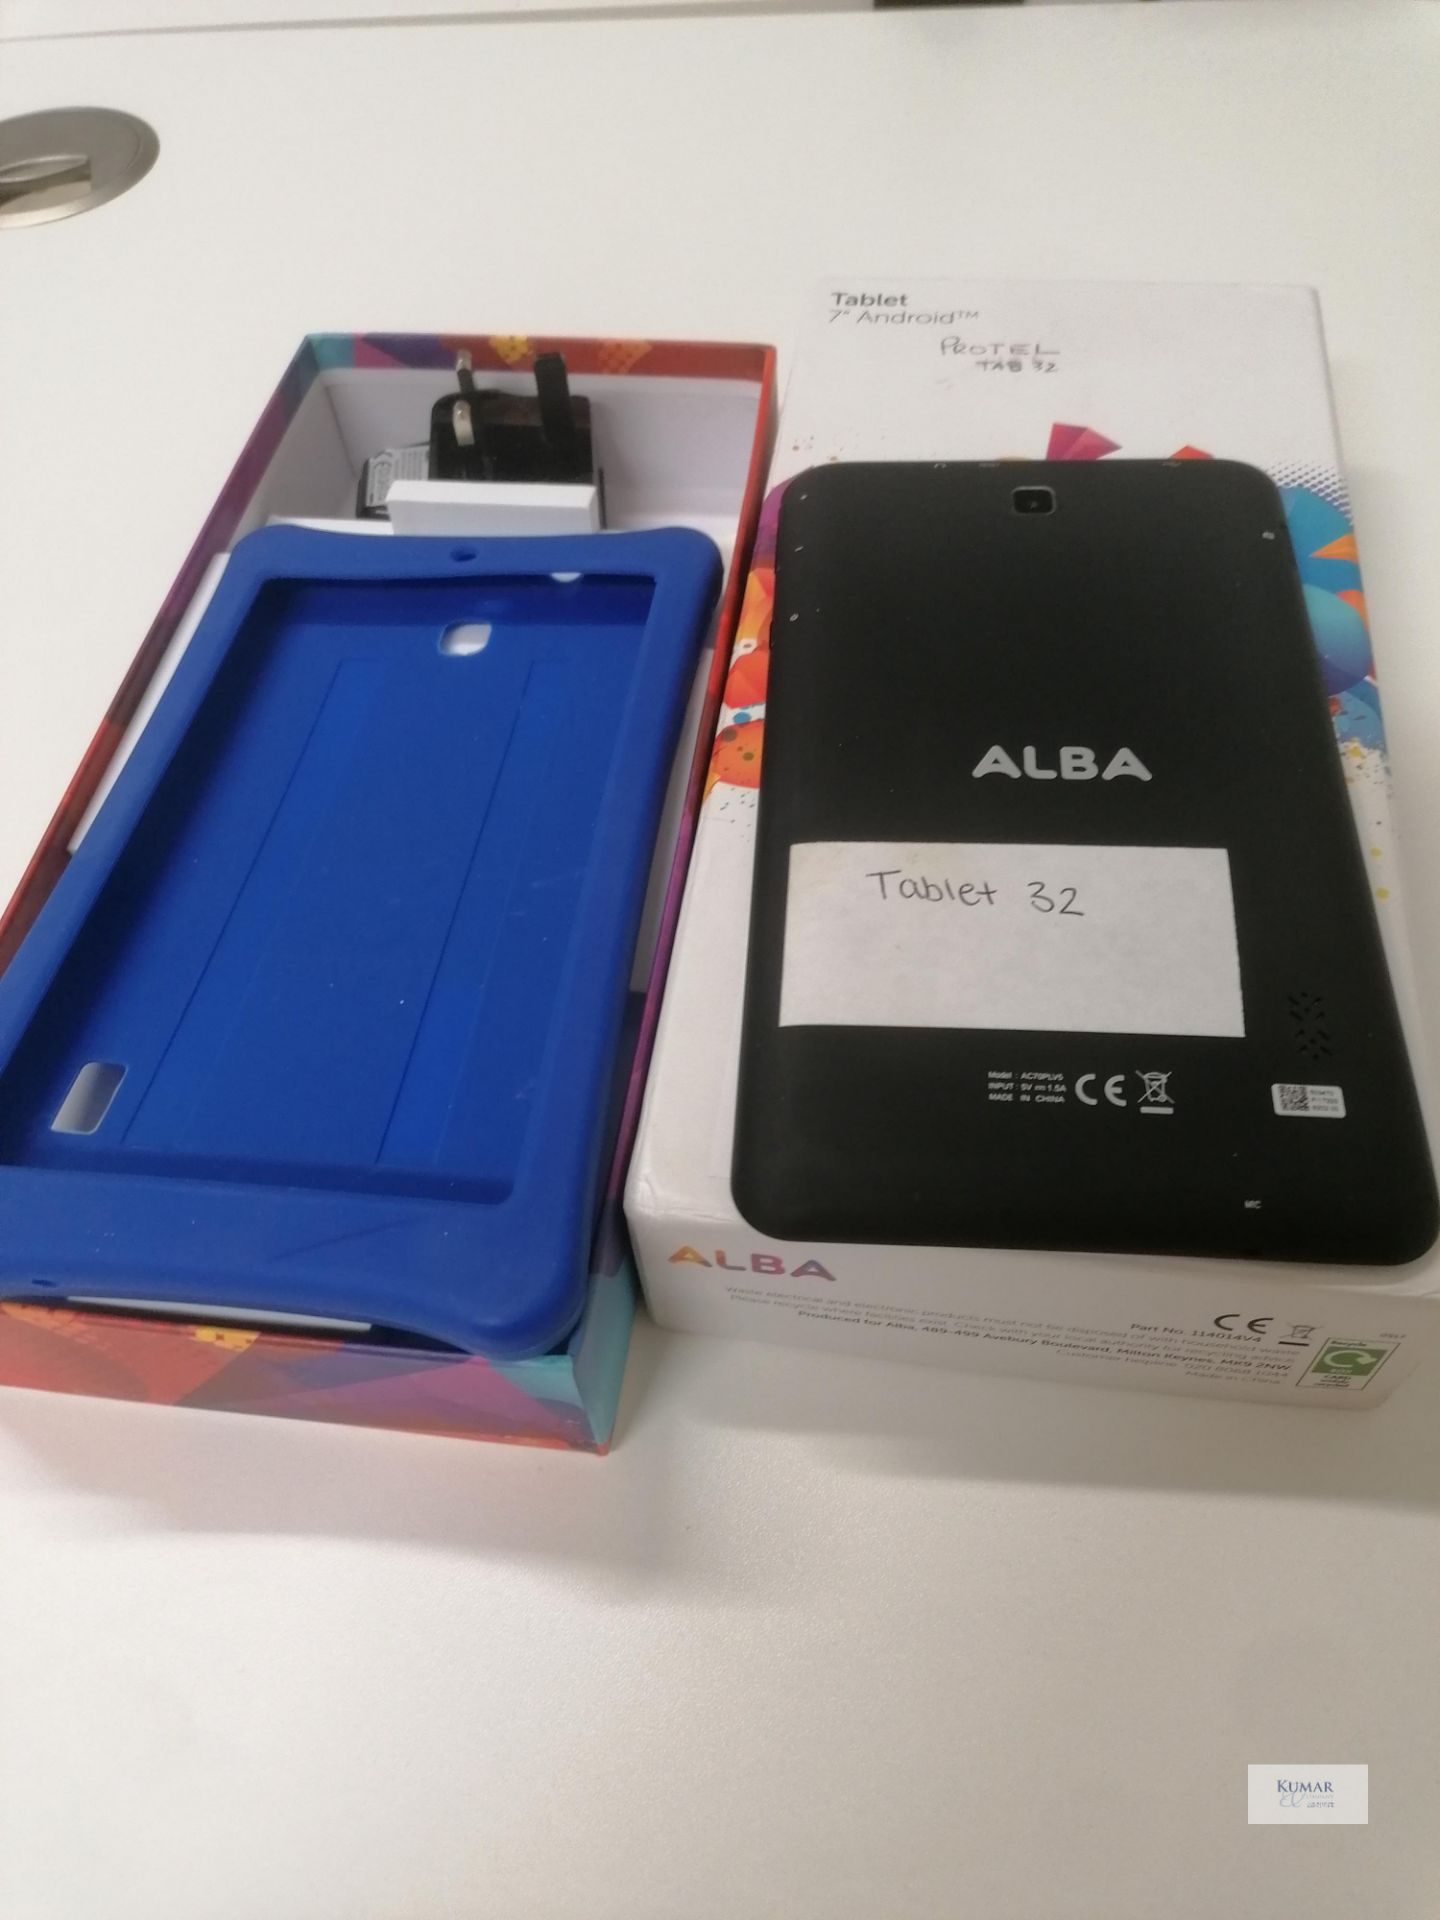 Alba Model AC07PLVS 7" Tablet with protective case,cable and charger Boxed - Image 4 of 6